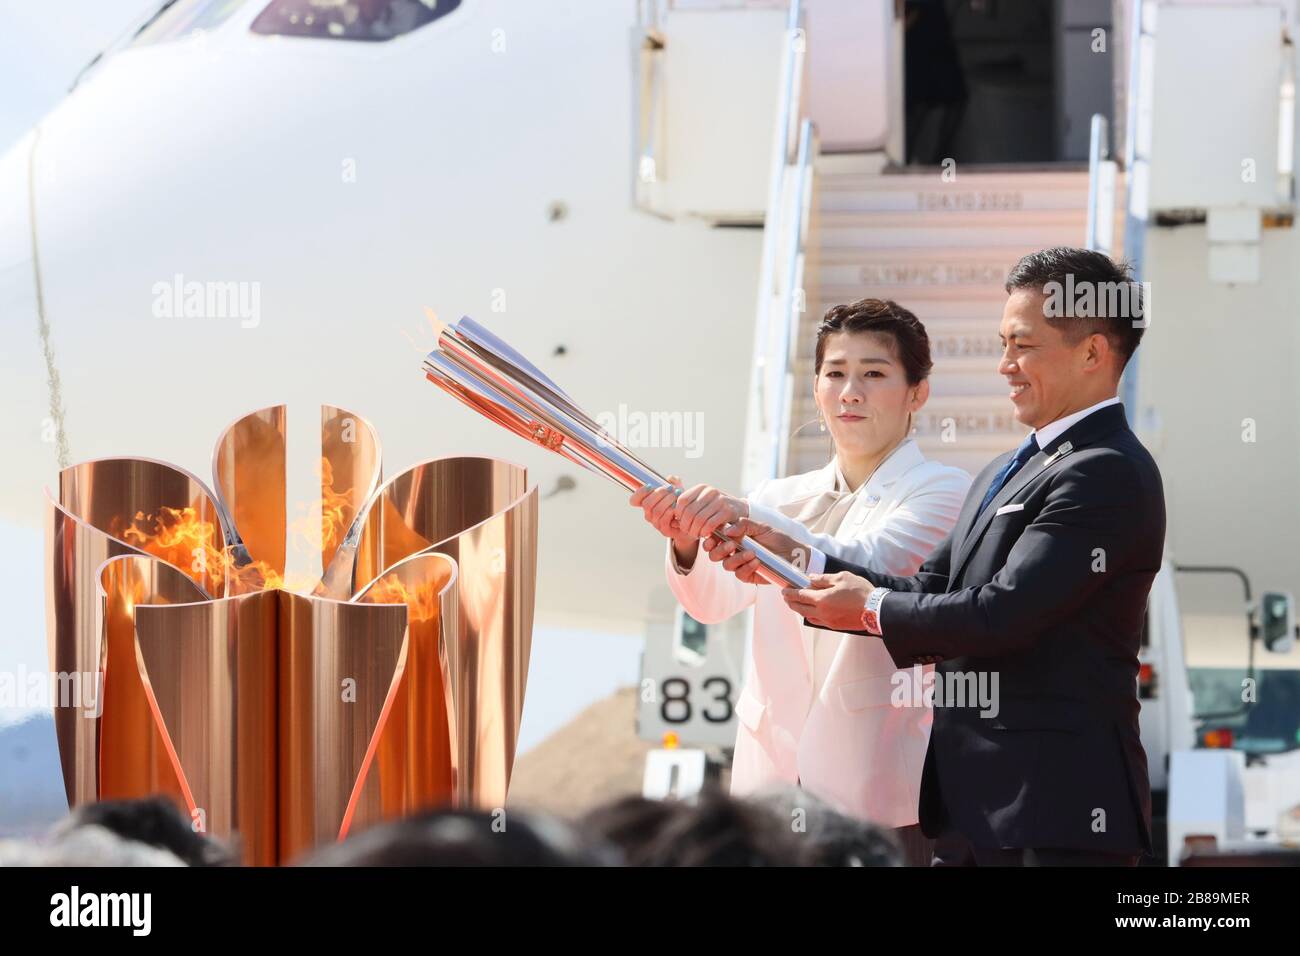 Higashi Matsushima, Japan. 20th Mar, 2020. Olympic gold medalists Saori Yoshida (L) of wrestling and Tadahiro Nomura (R) of judo light to a caldron with a torch as they attend the arrival ceremony for the Olympic flame at the Matsushima air base in Higashi Matsushima in Miyagi prefecture, northern Japan on Friday, March 20, 2020. Tokyo 2020 Olympic Games will start from March 26 at Fukushima prefecture. Credit: Yoshio Tsunoda/AFLO/Alamy Live News Stock Photo